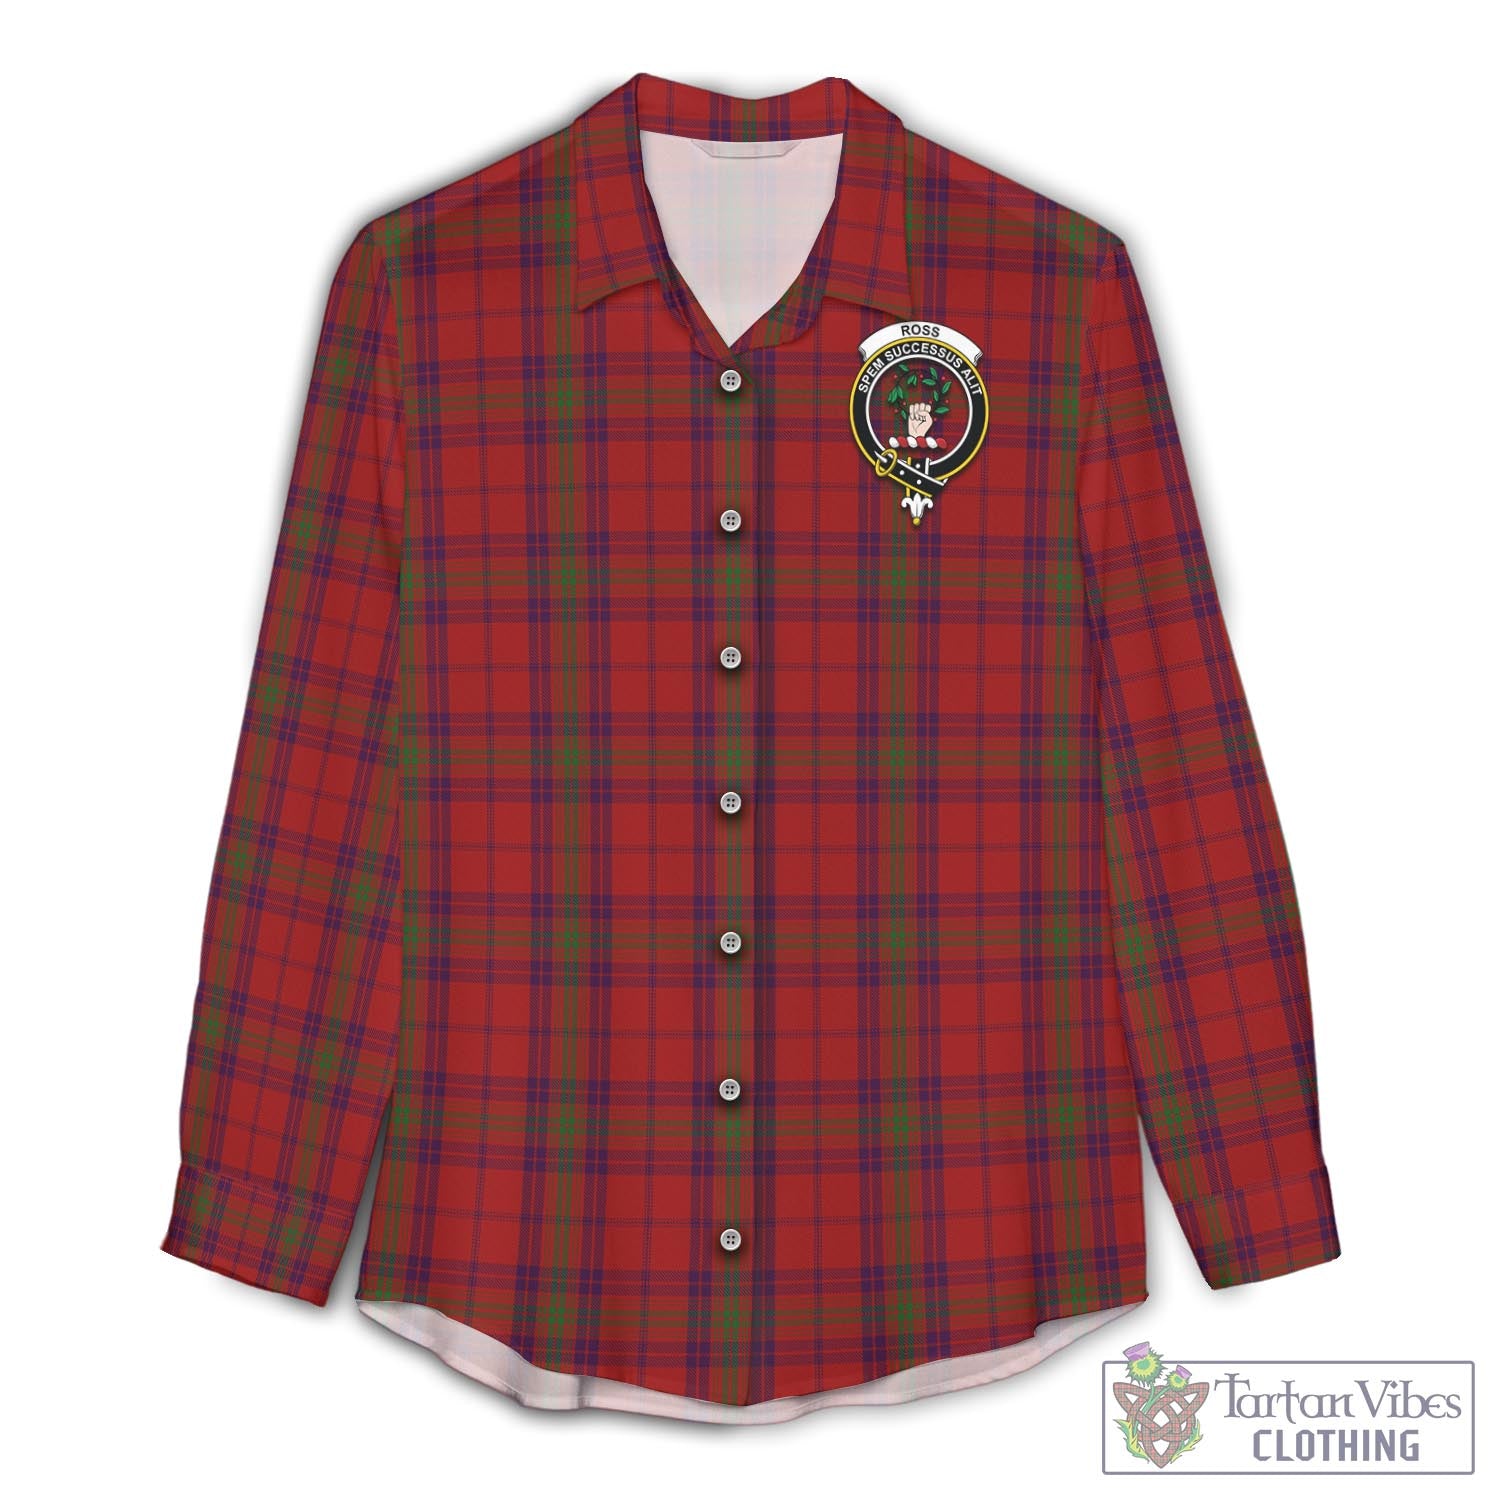 Tartan Vibes Clothing Ross Old Tartan Womens Casual Shirt with Family Crest